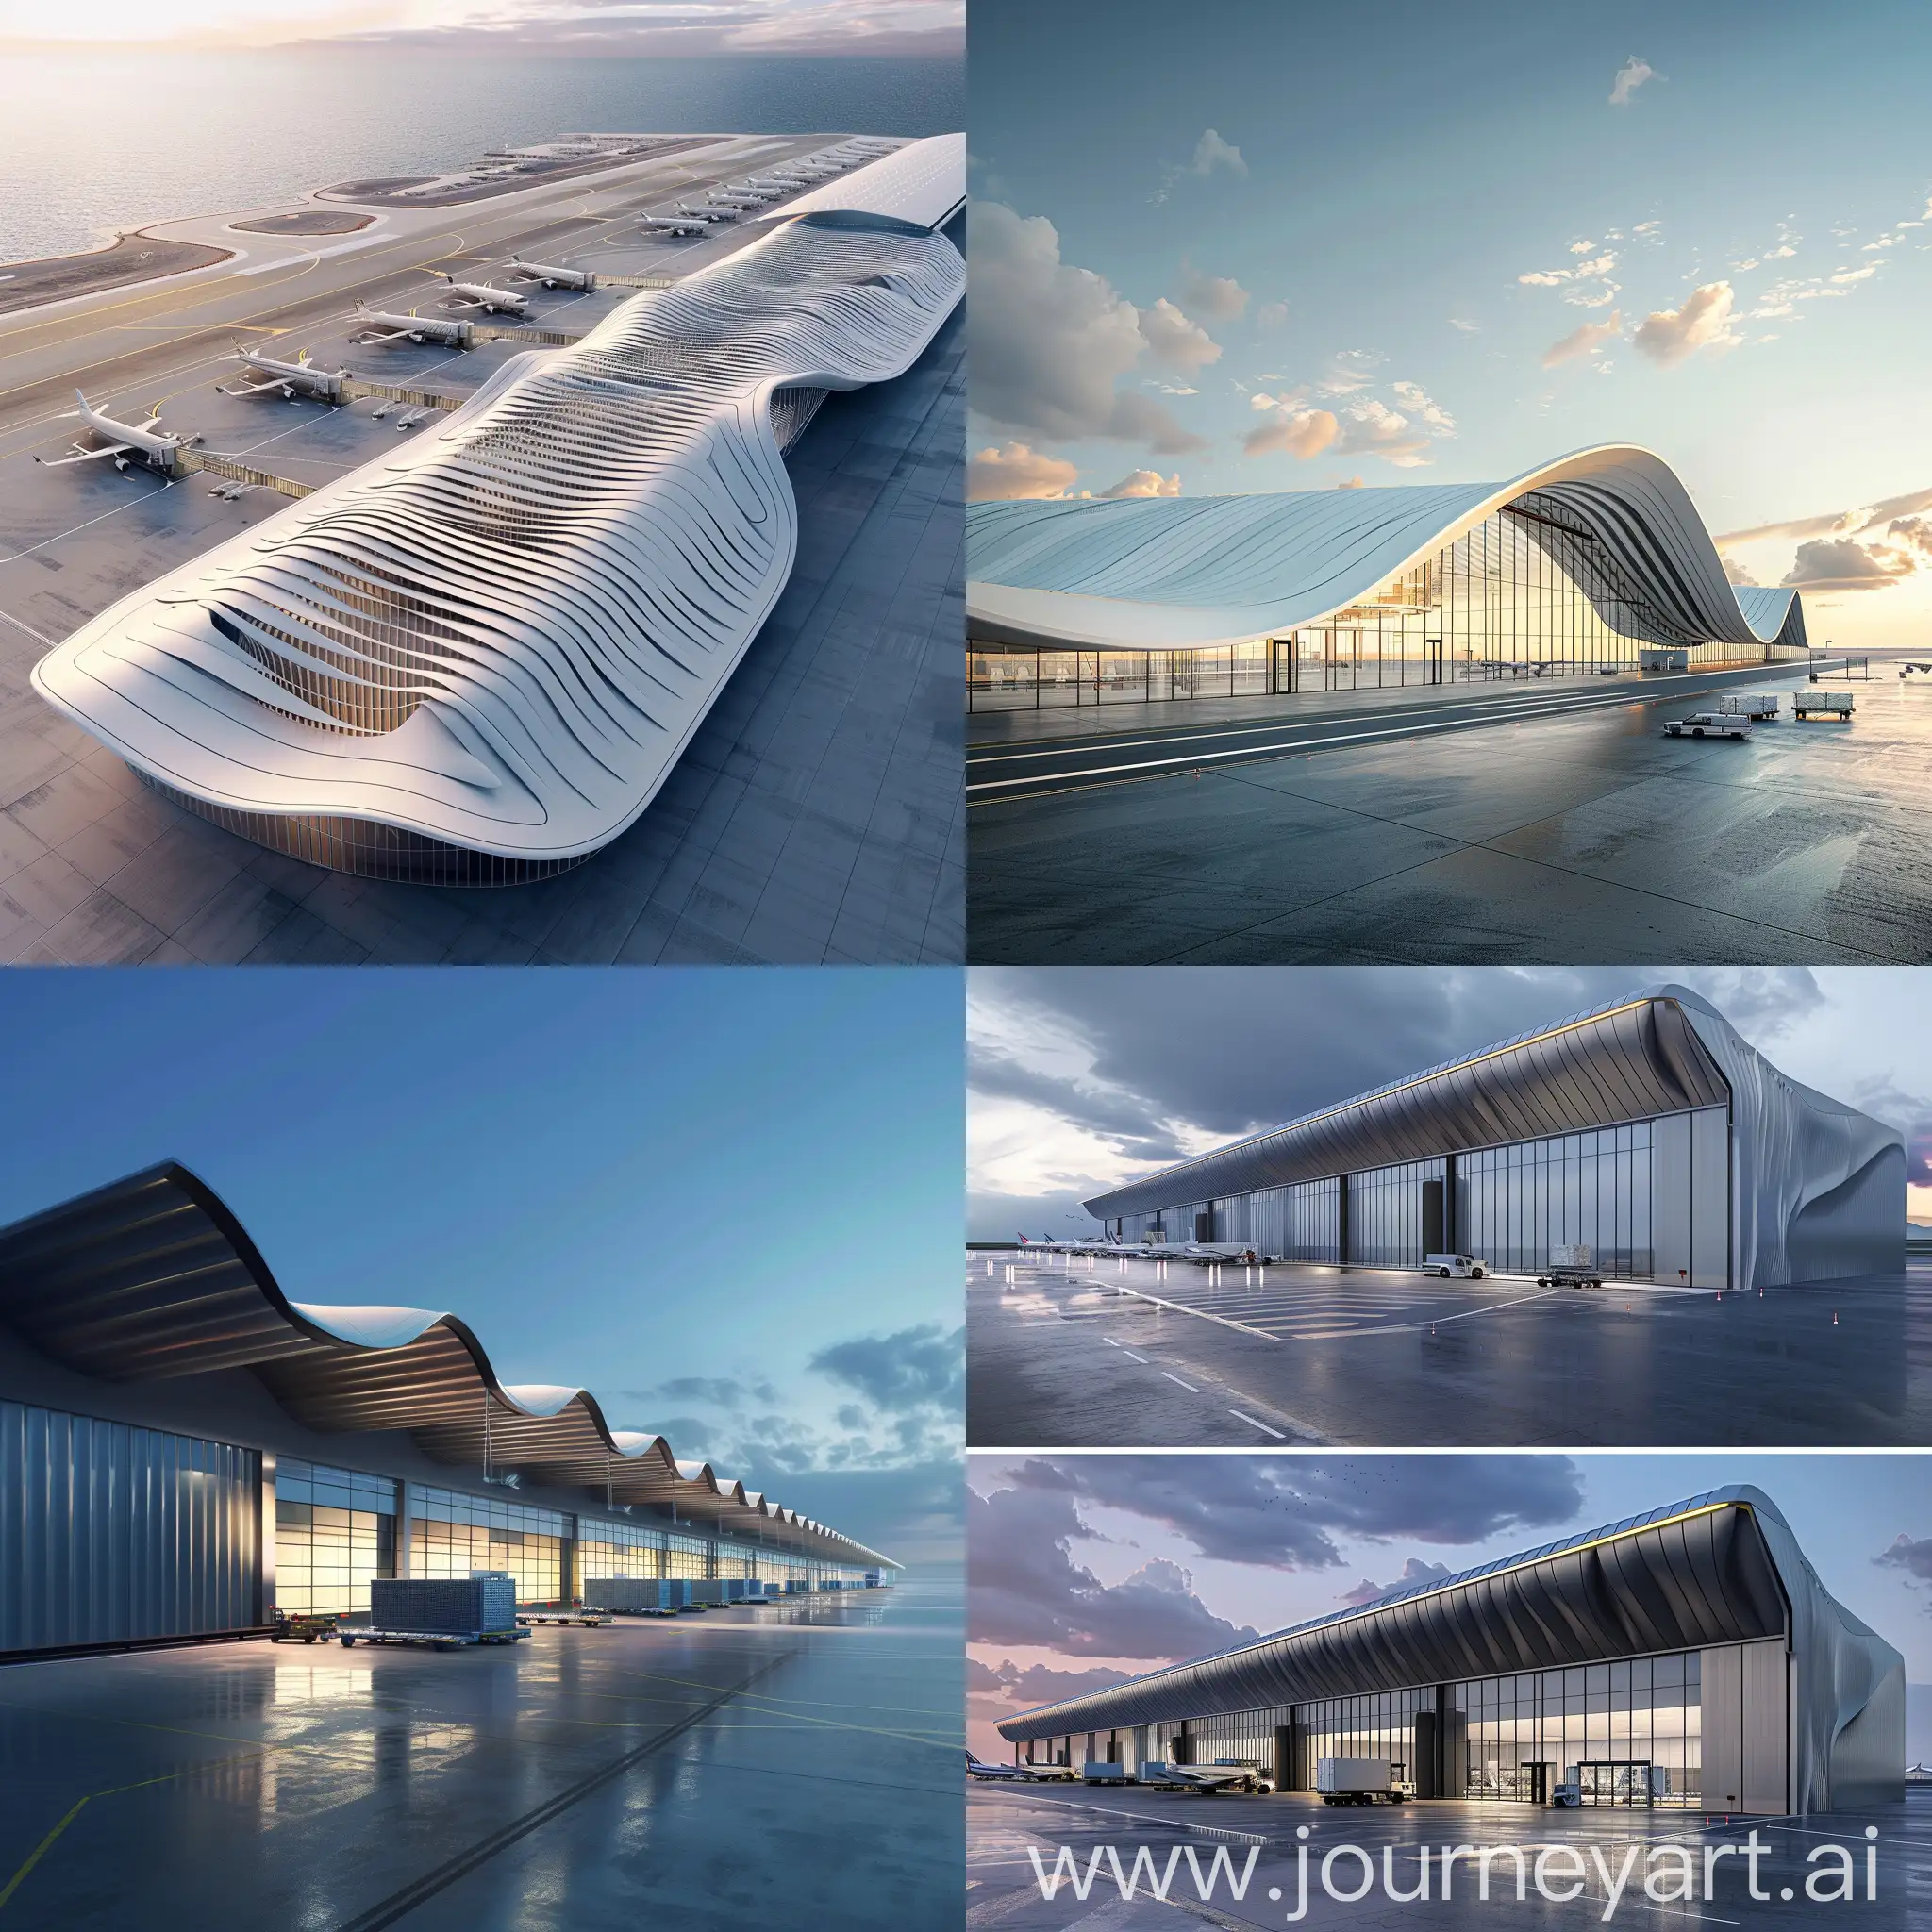 Design a airport cargo terminal in linear form, keeping its roof design parametric inspired by sea waves